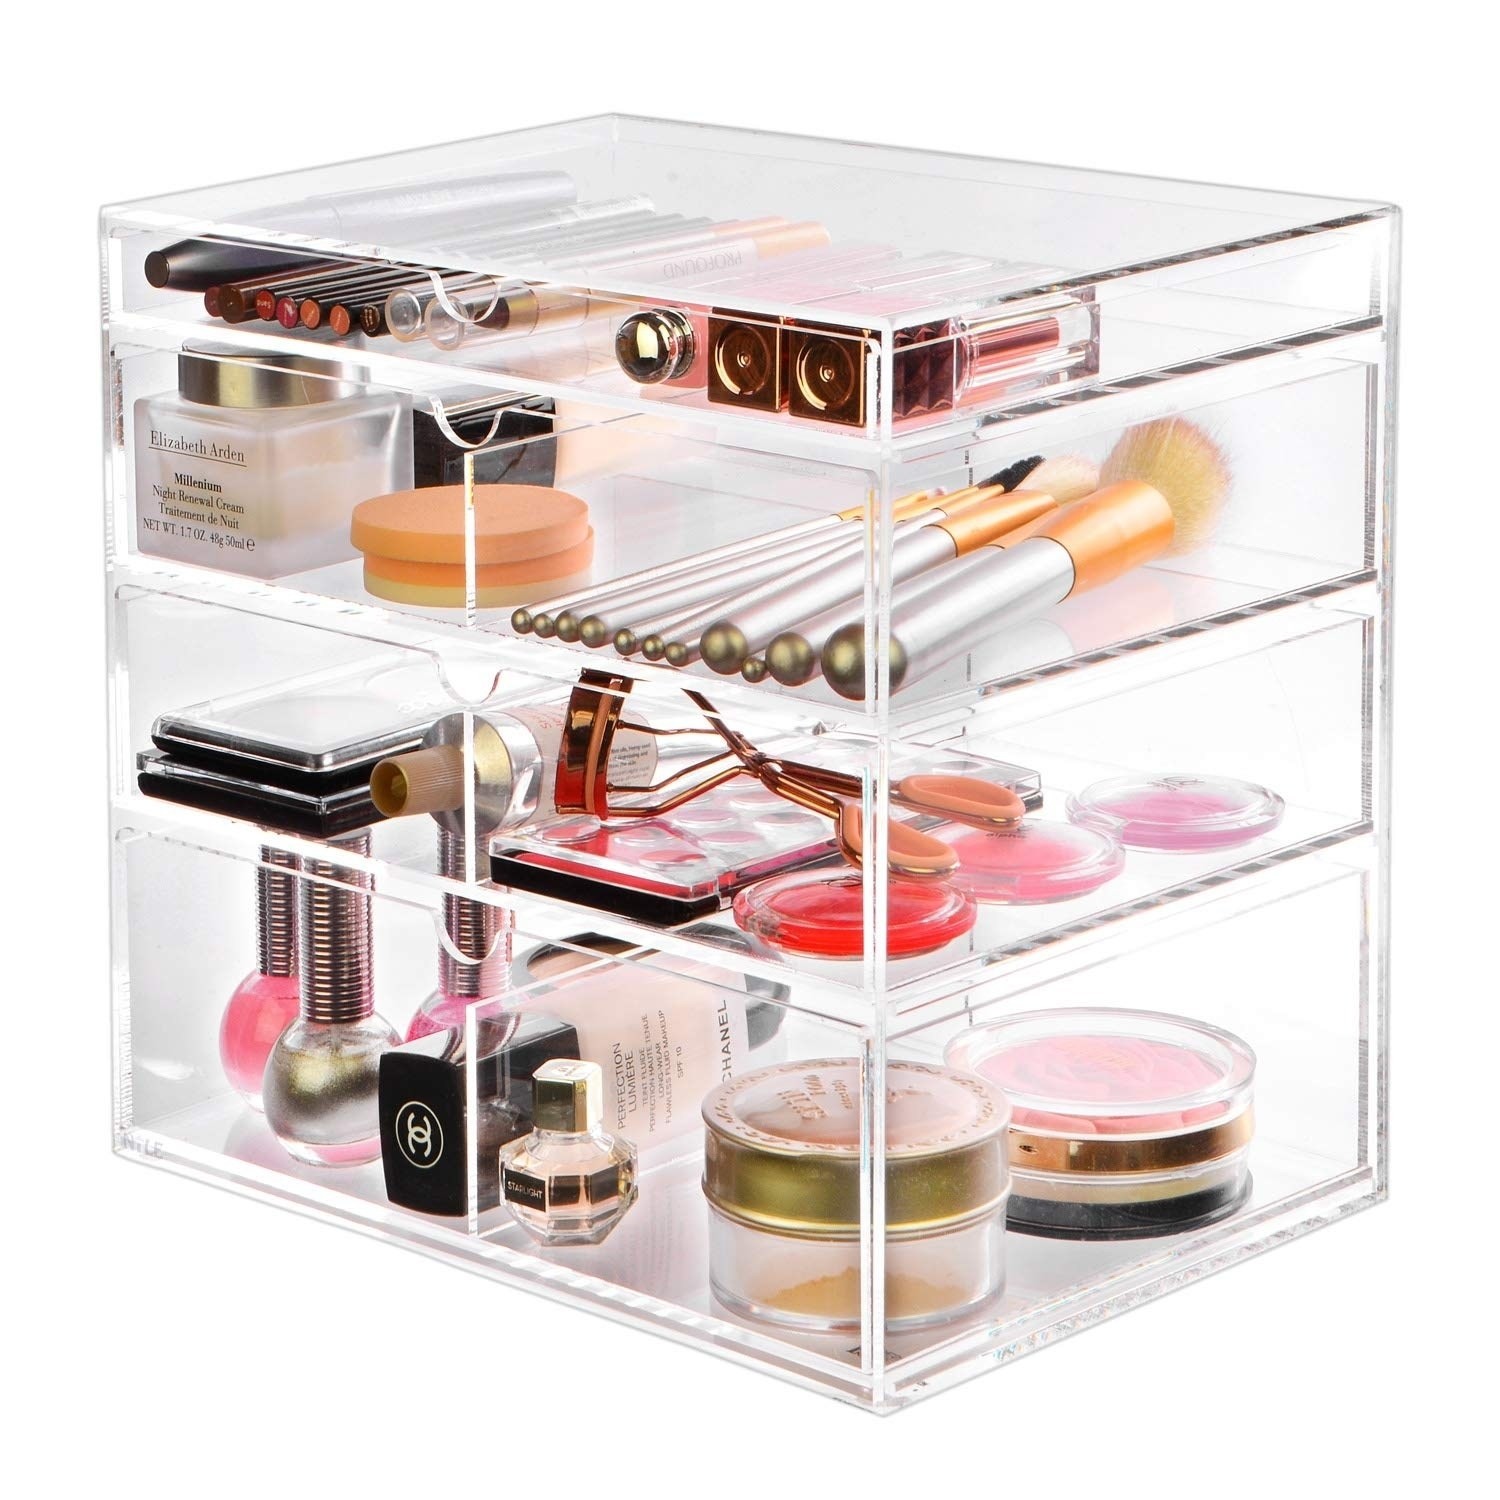 Transparent Acrylic Jewelry Box With Drawer Manufacturers, Transparent Acrylic Jewelry Box With Drawer Factory, Supply Transparent Acrylic Jewelry Box With Drawer